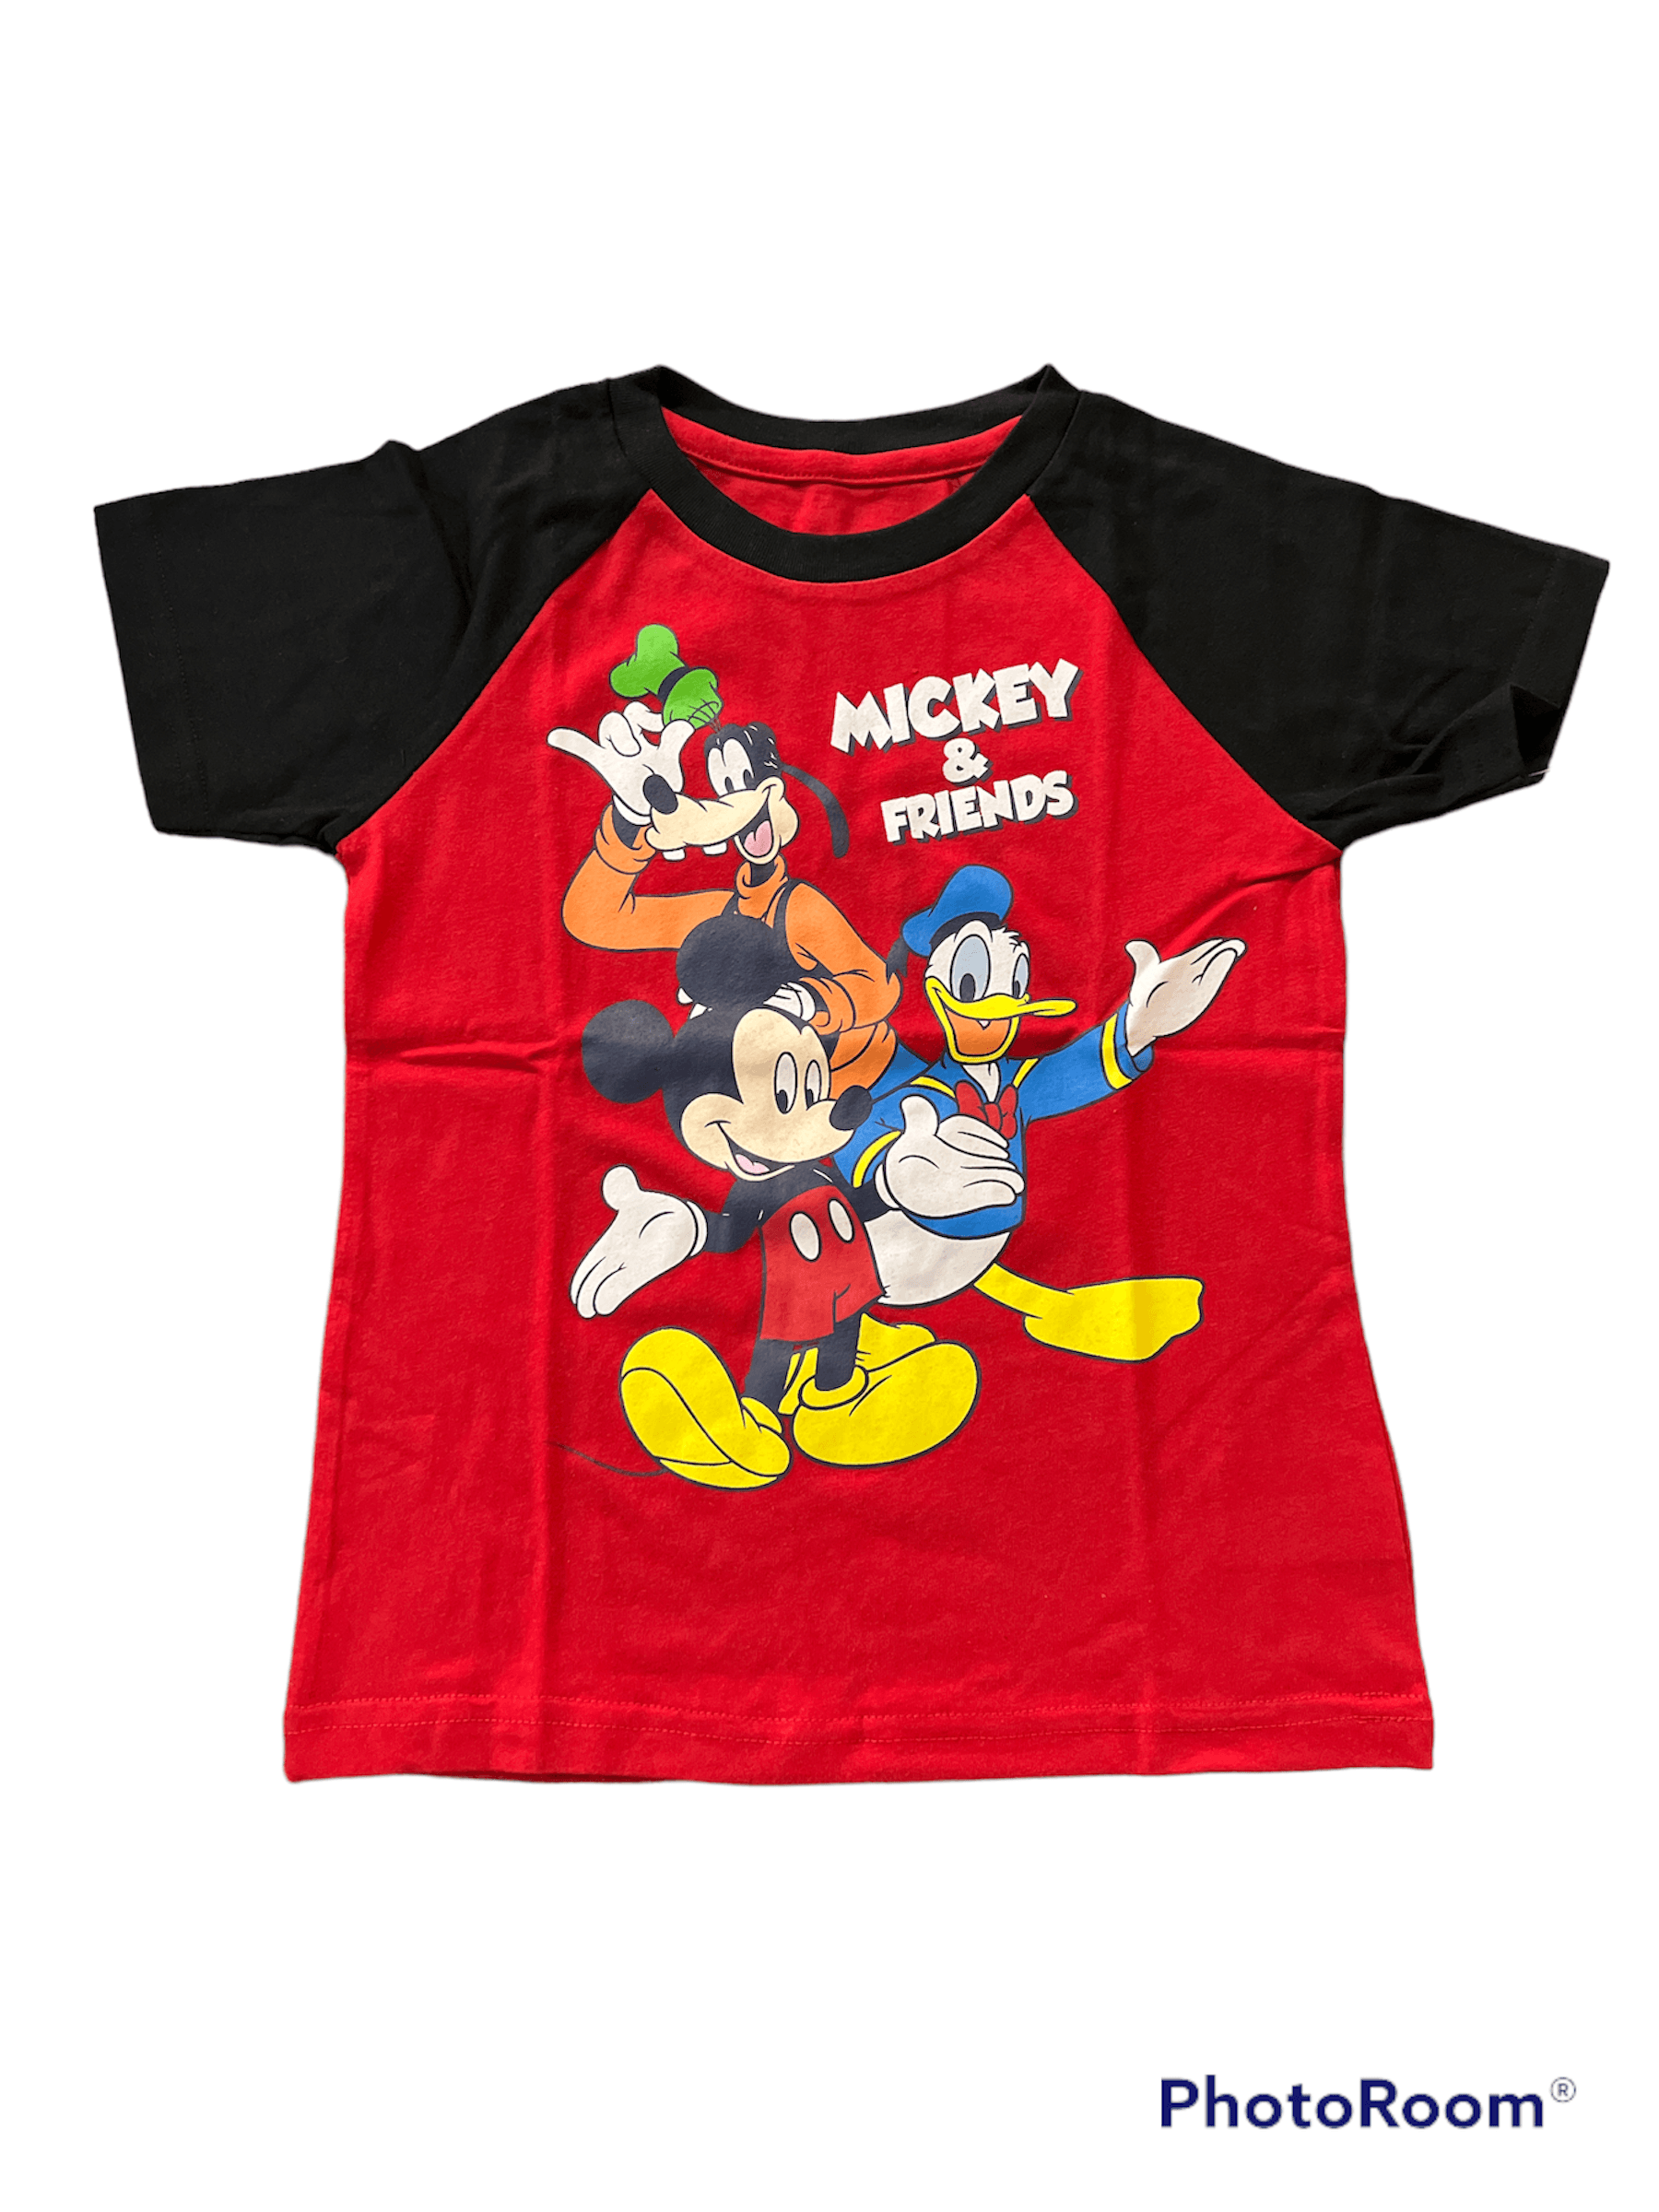 Toddler Mickey & Friends Red Shirt